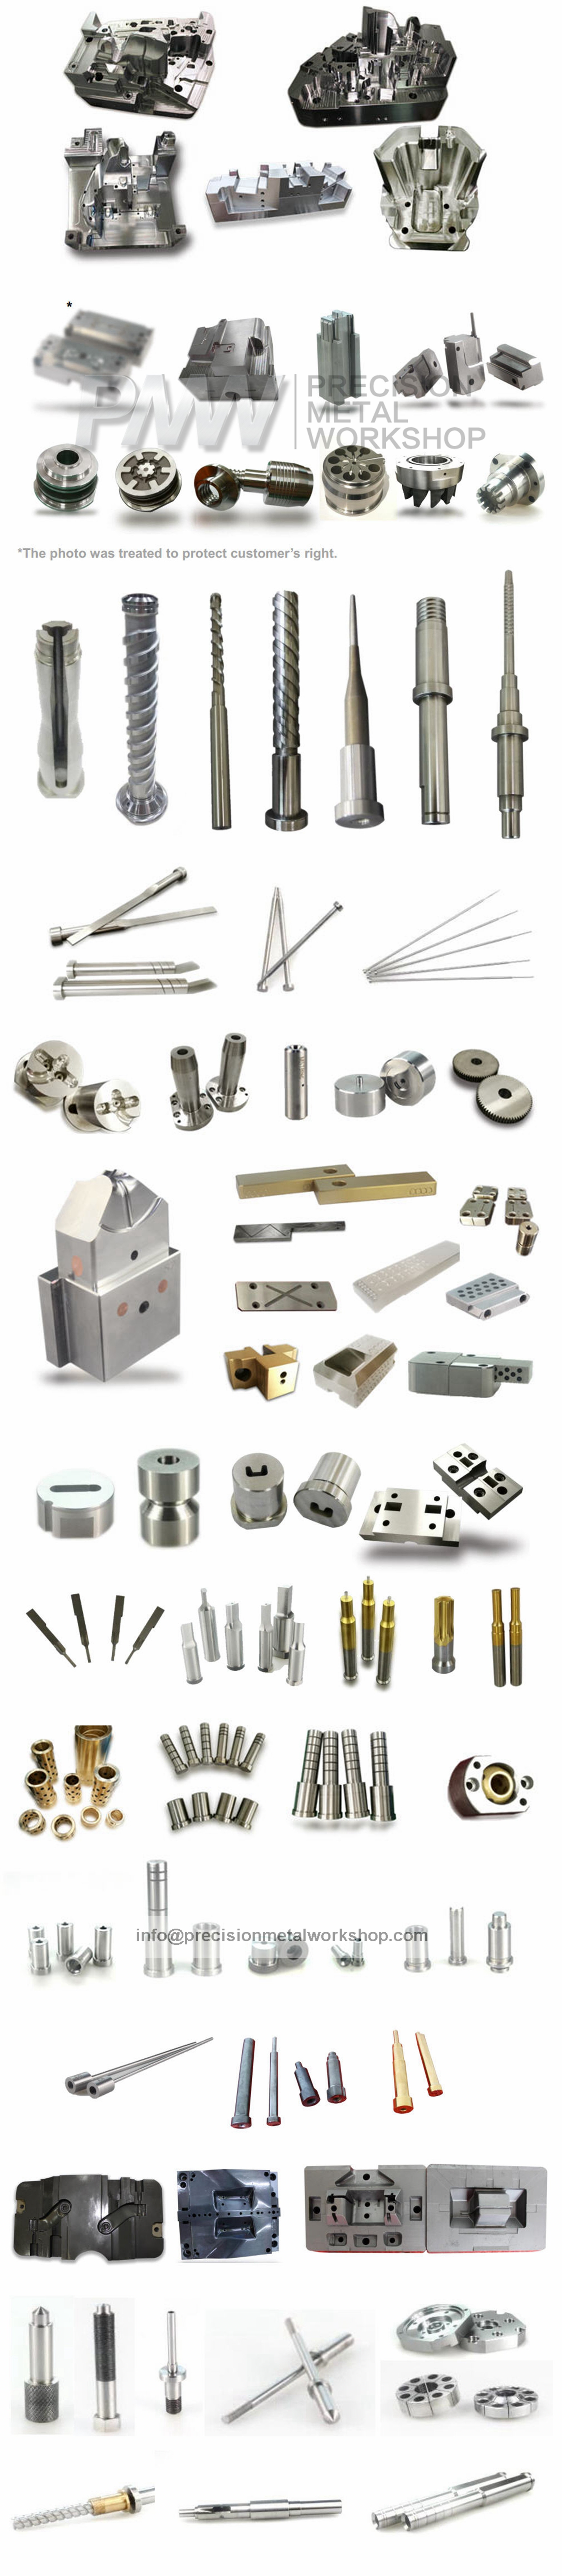 Oval shape Precision punches and dies with shoulder,material HSS or M2, TiN plating available